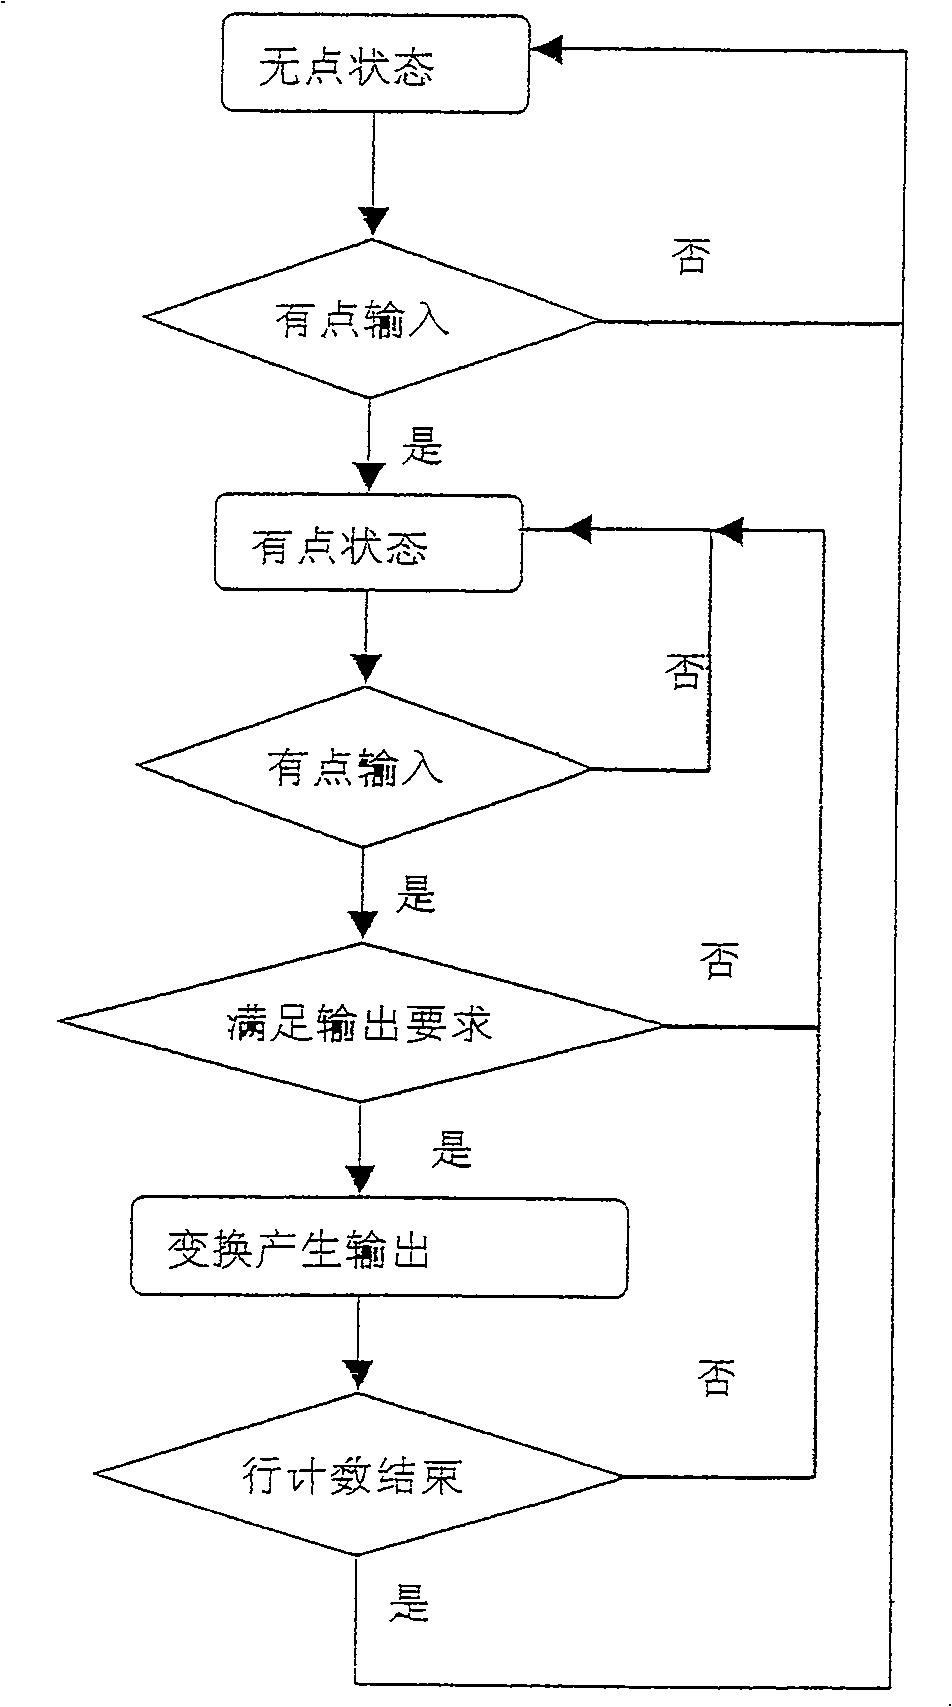 Contraction of digital image circuit with adjustable proportion and accuracy